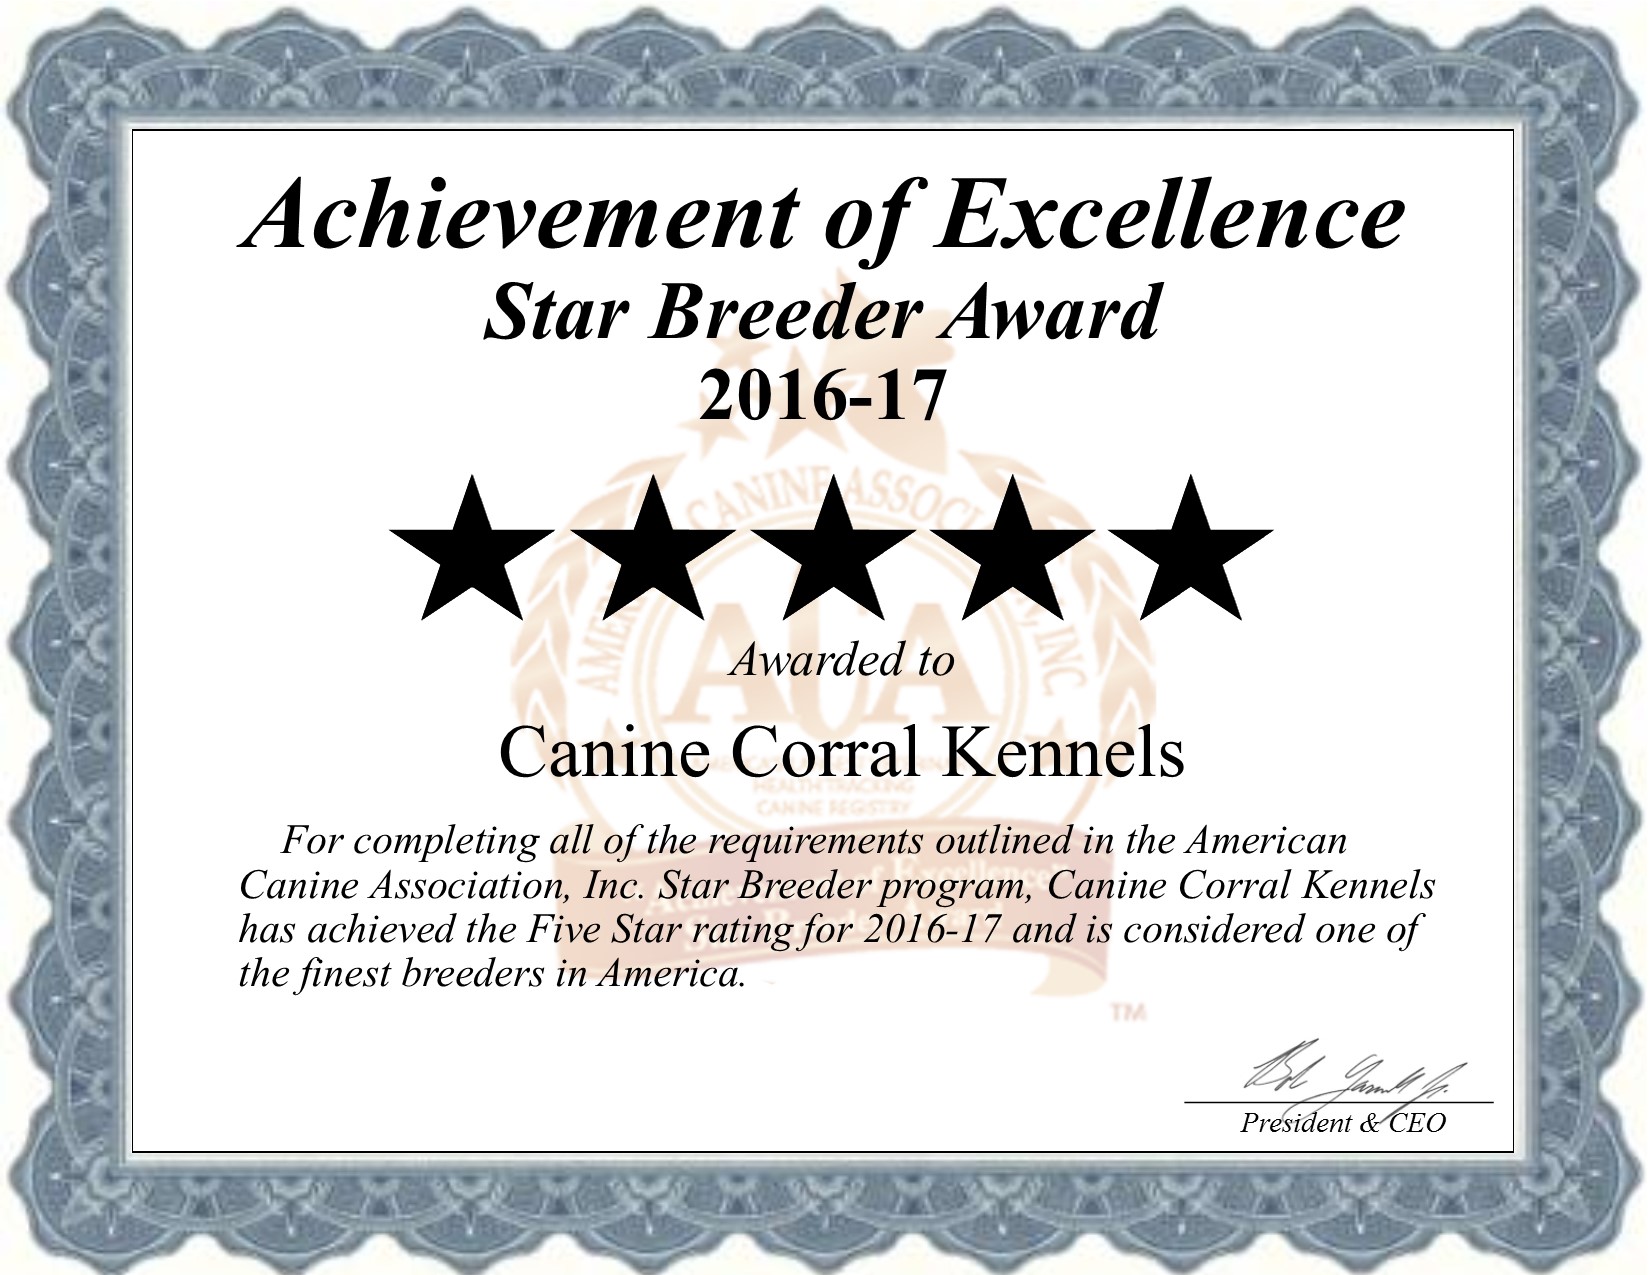 Canine, Corral, kennels, certificate, canine-corral-kennels